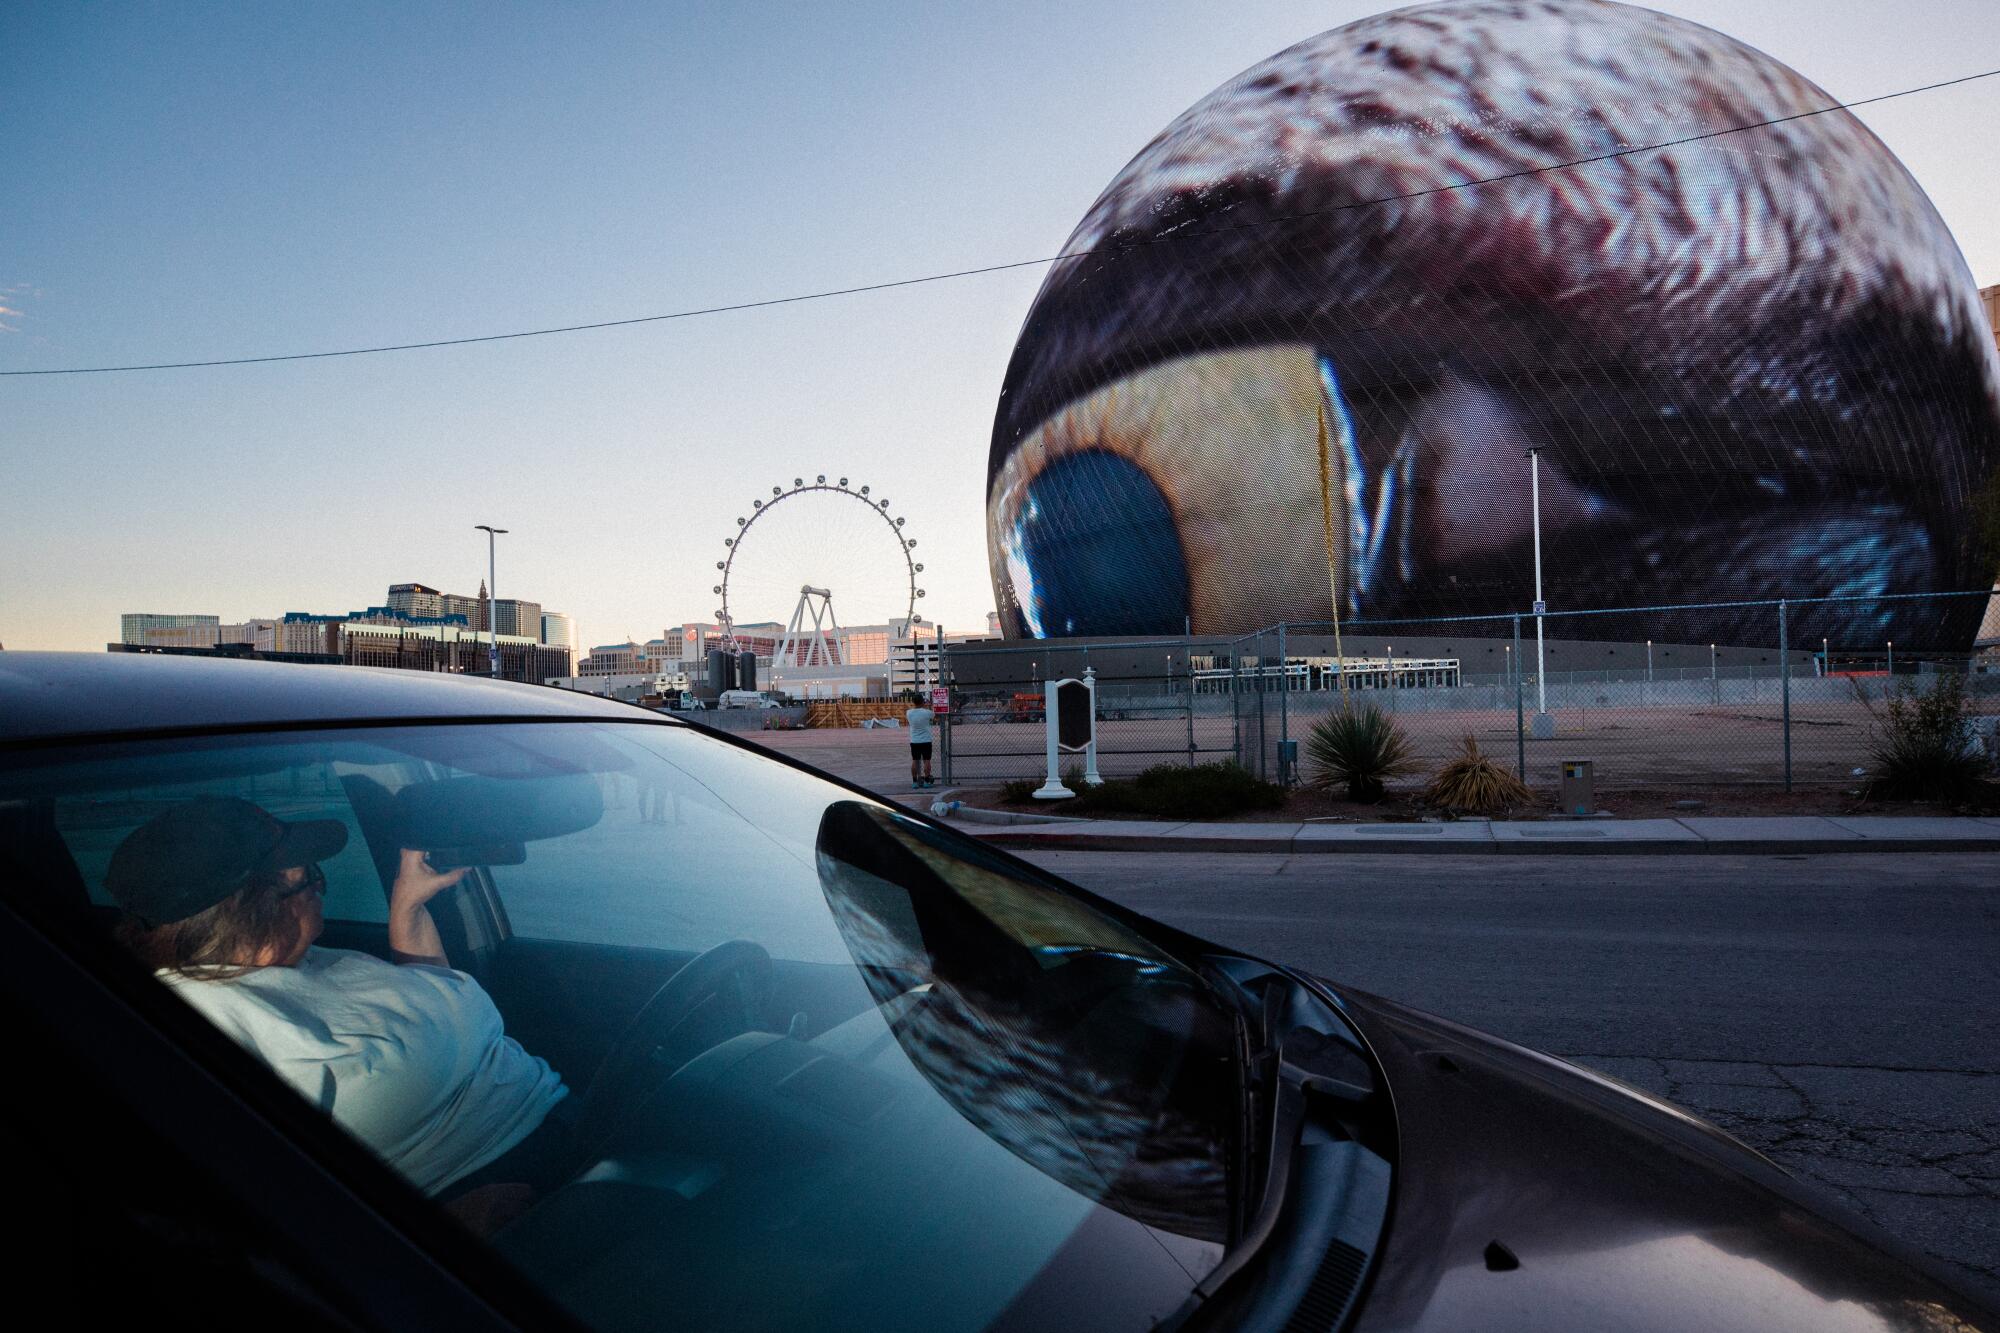 A spherical building broadcasting an eyeball that seems to peer into a passersby car.